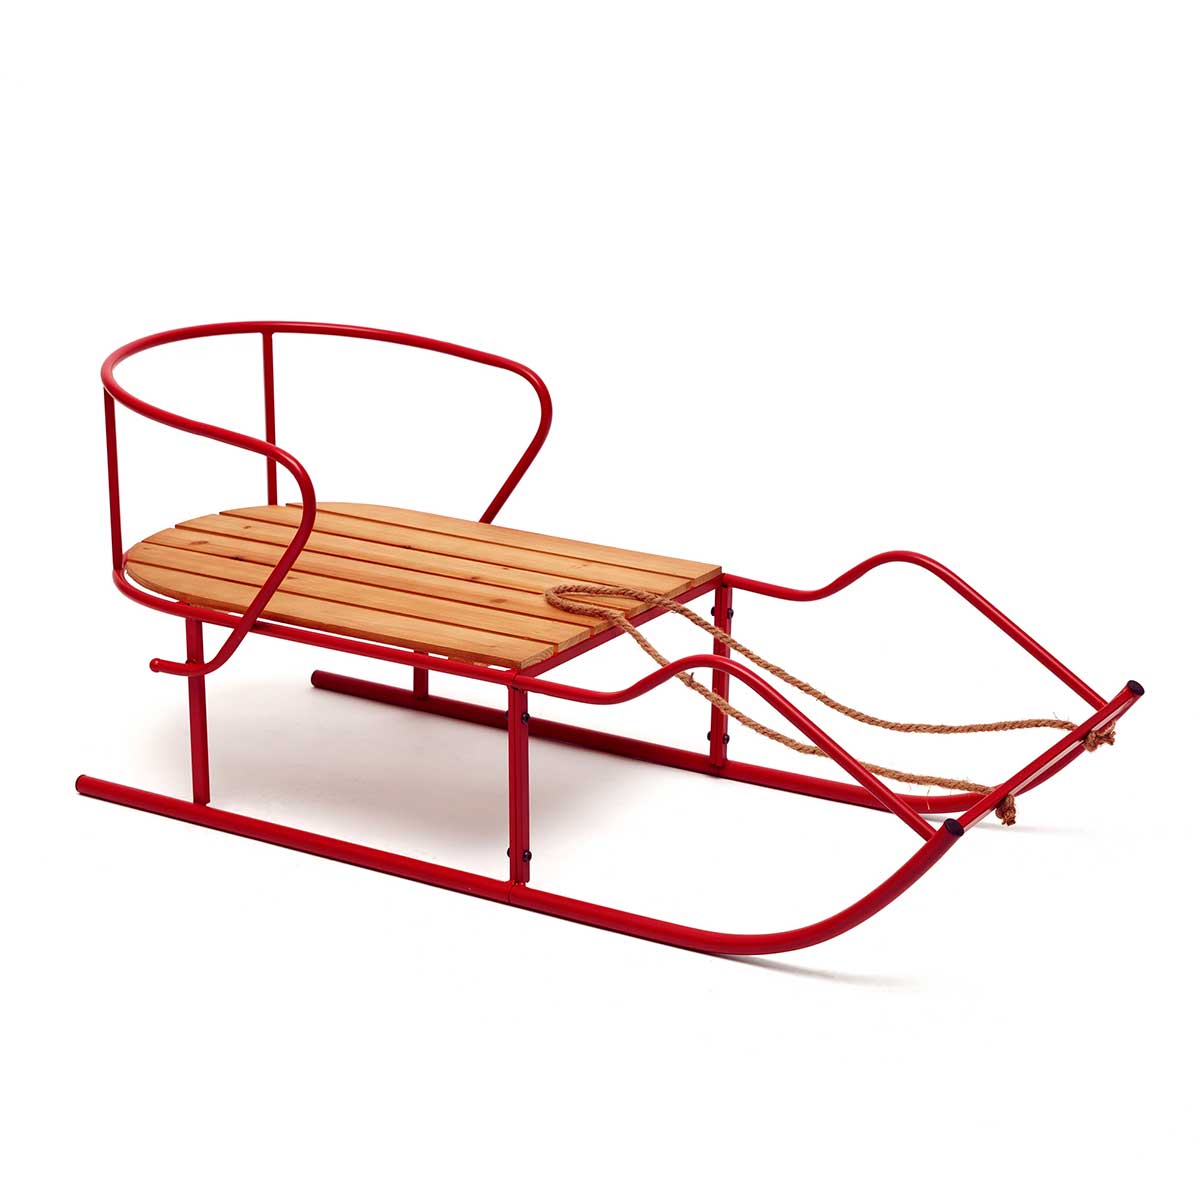 DOWNHILL SLEDDING METAL SLED RED WITH NATURAL WOOD SEACHT - Click Image to Close